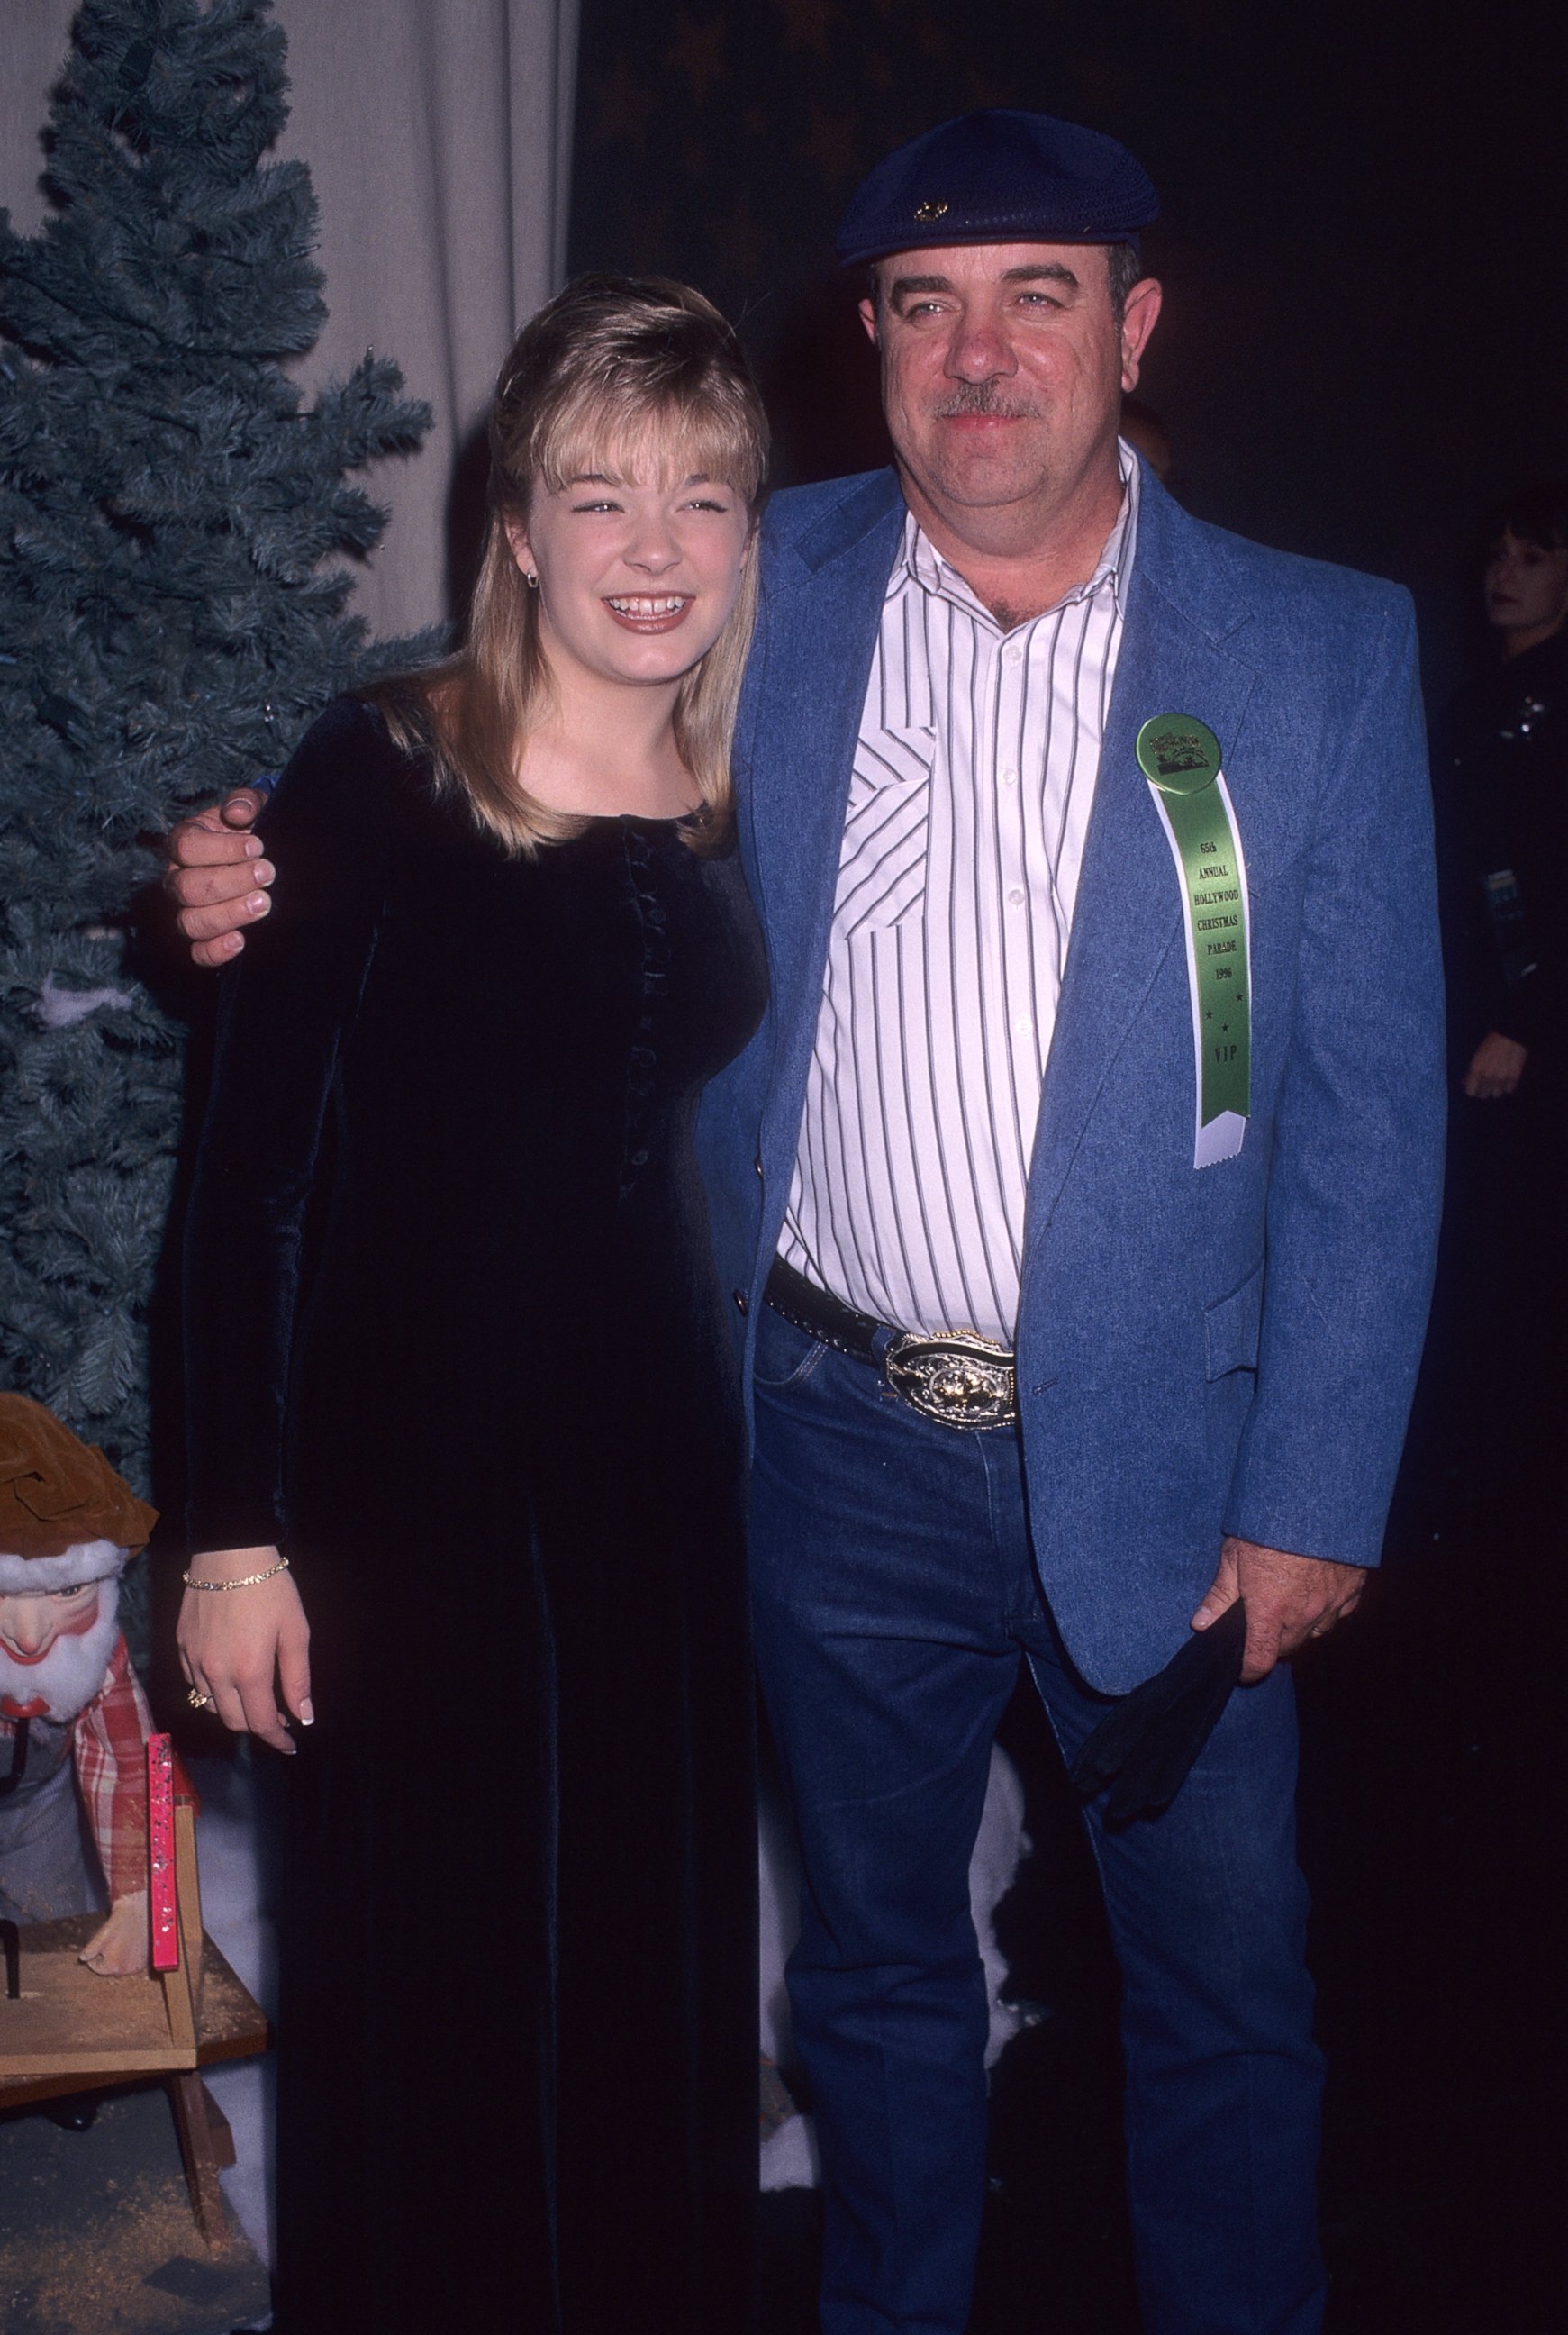 PHOTO: LeAnn Rimes and father Wilbur Rimes attend the 65th Annual Hollywood Christmas Parade on Dec. 1, 1996 in Hollywood, Calif. 